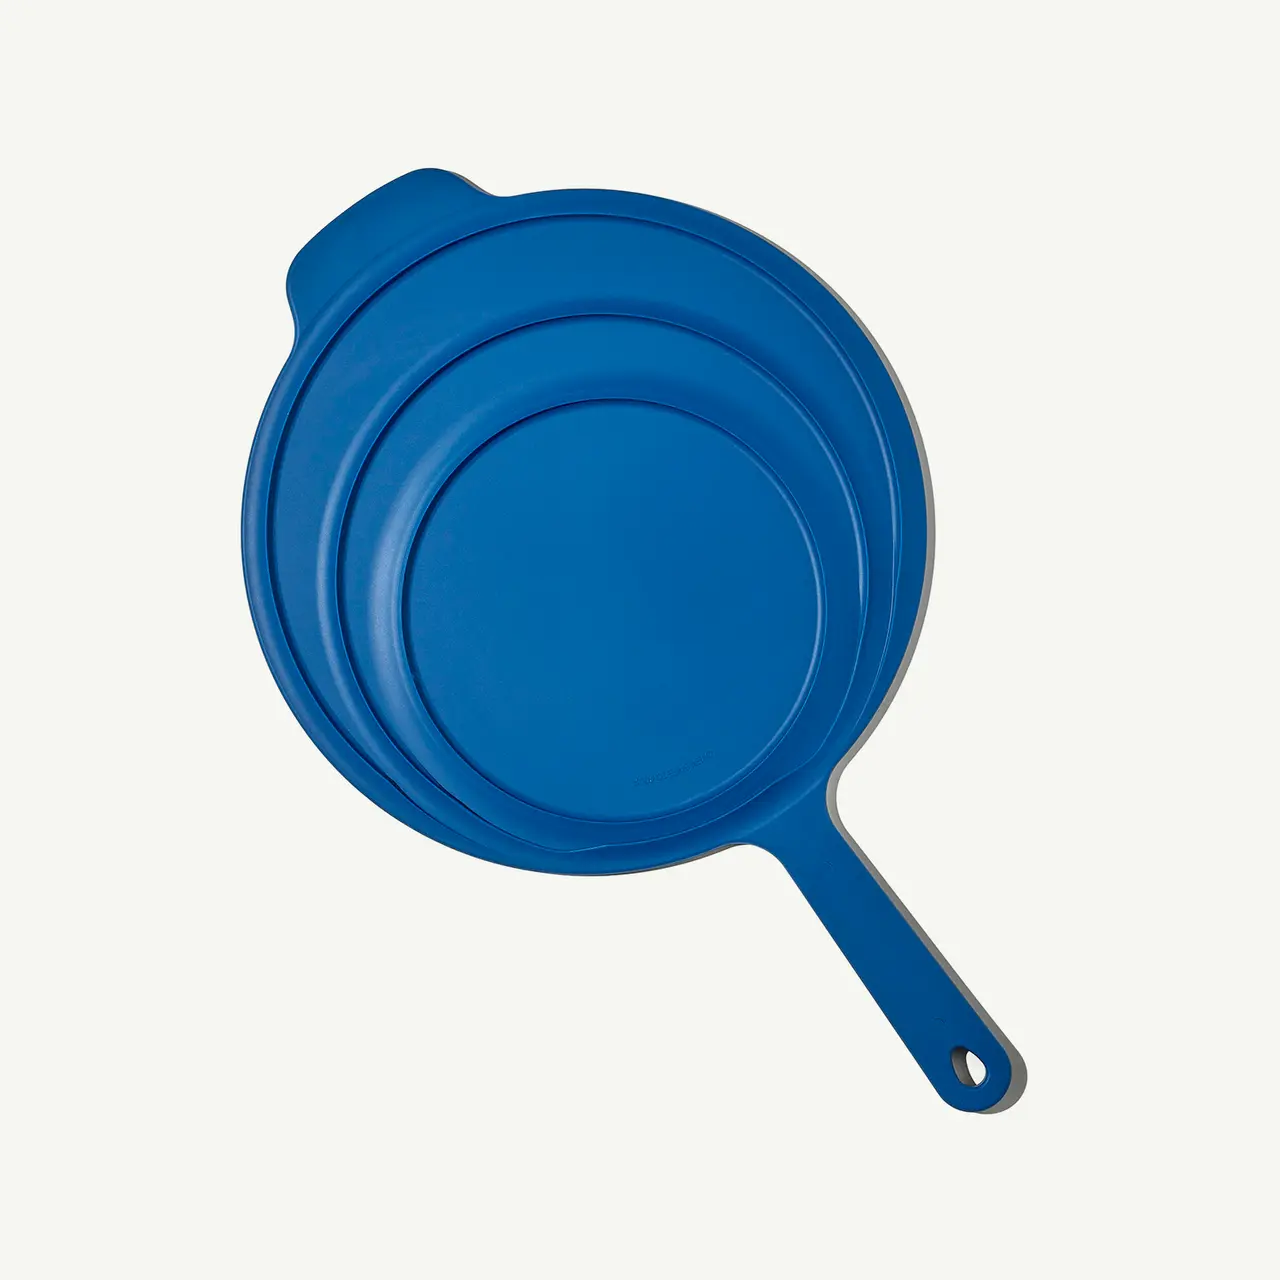 A blue silicone suction lid is displayed centered against a light background.